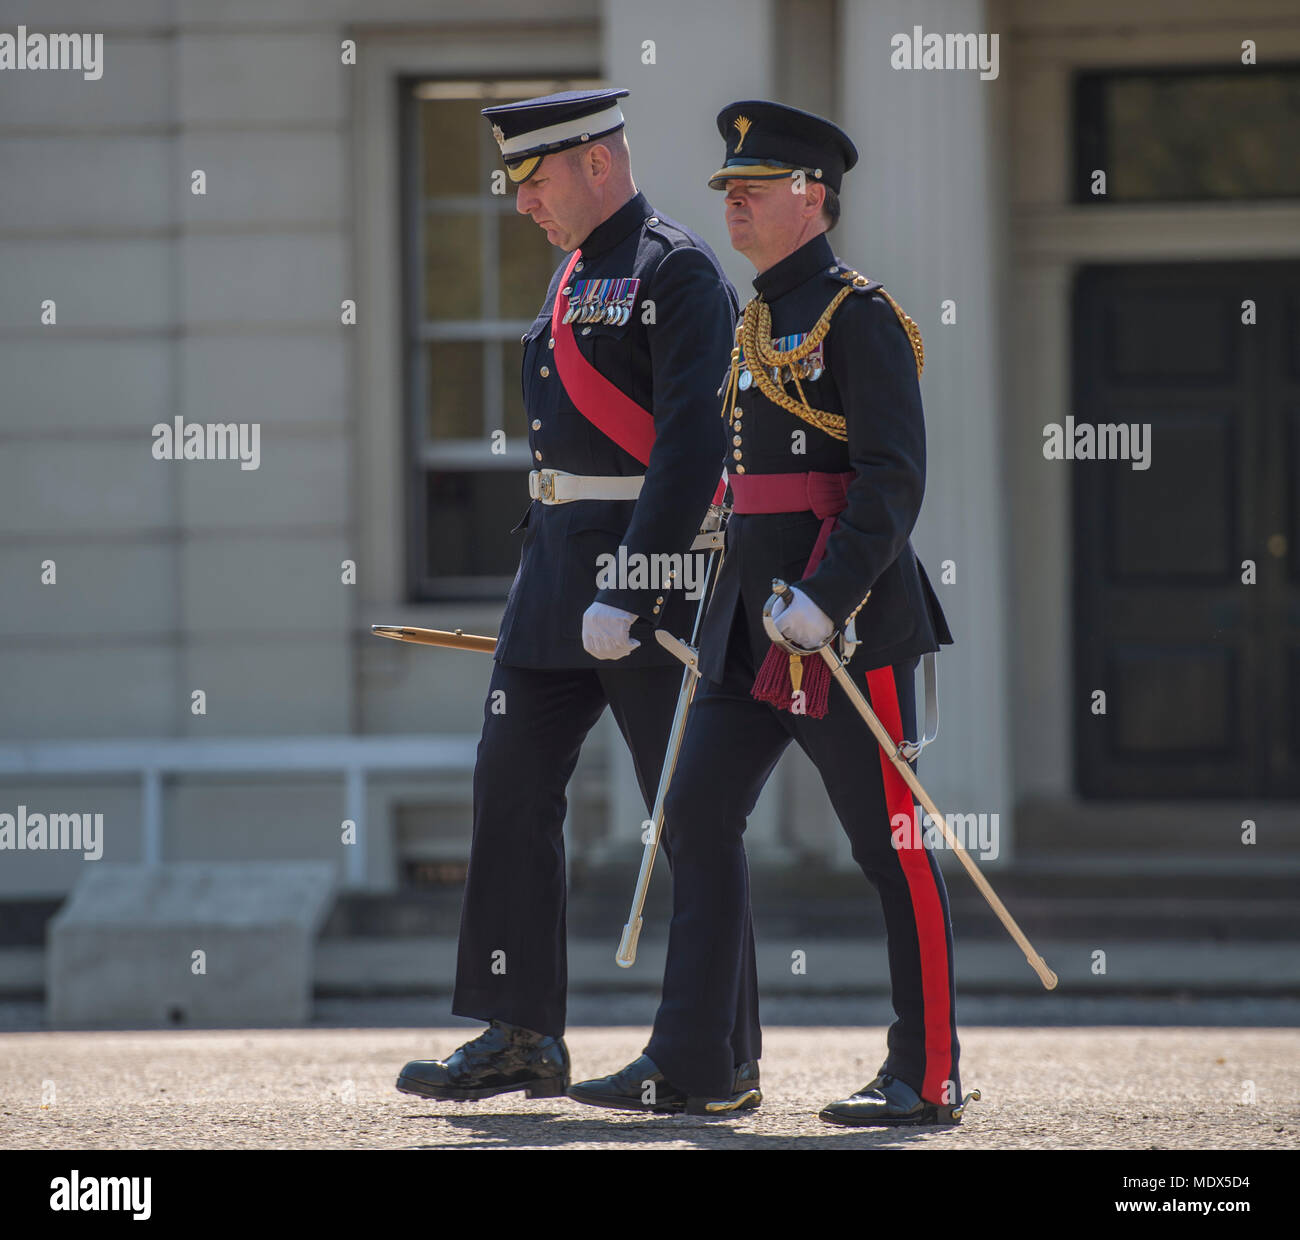 Wellington Barracks, London, UK. 20 April, 2018. Kilted soldiers assist with ceremonial guard duties in London for the next 3 weeks as Balaklava Company, 5th Battalion The Royal Regiment of Scotland takes up post in the capital. Before these operational soldiers are allowed to stand guard outside Buckingham Palace or the Tower of London, they first have to pass muster in front of some of the Army’s toughest judges. This Fit For Role Inspection requires the Edinburgh-based troops to prove their ceremonial prowess in front of senior Officers of the Household Division. Credit: Malcolm Park/Alamy  Stock Photo